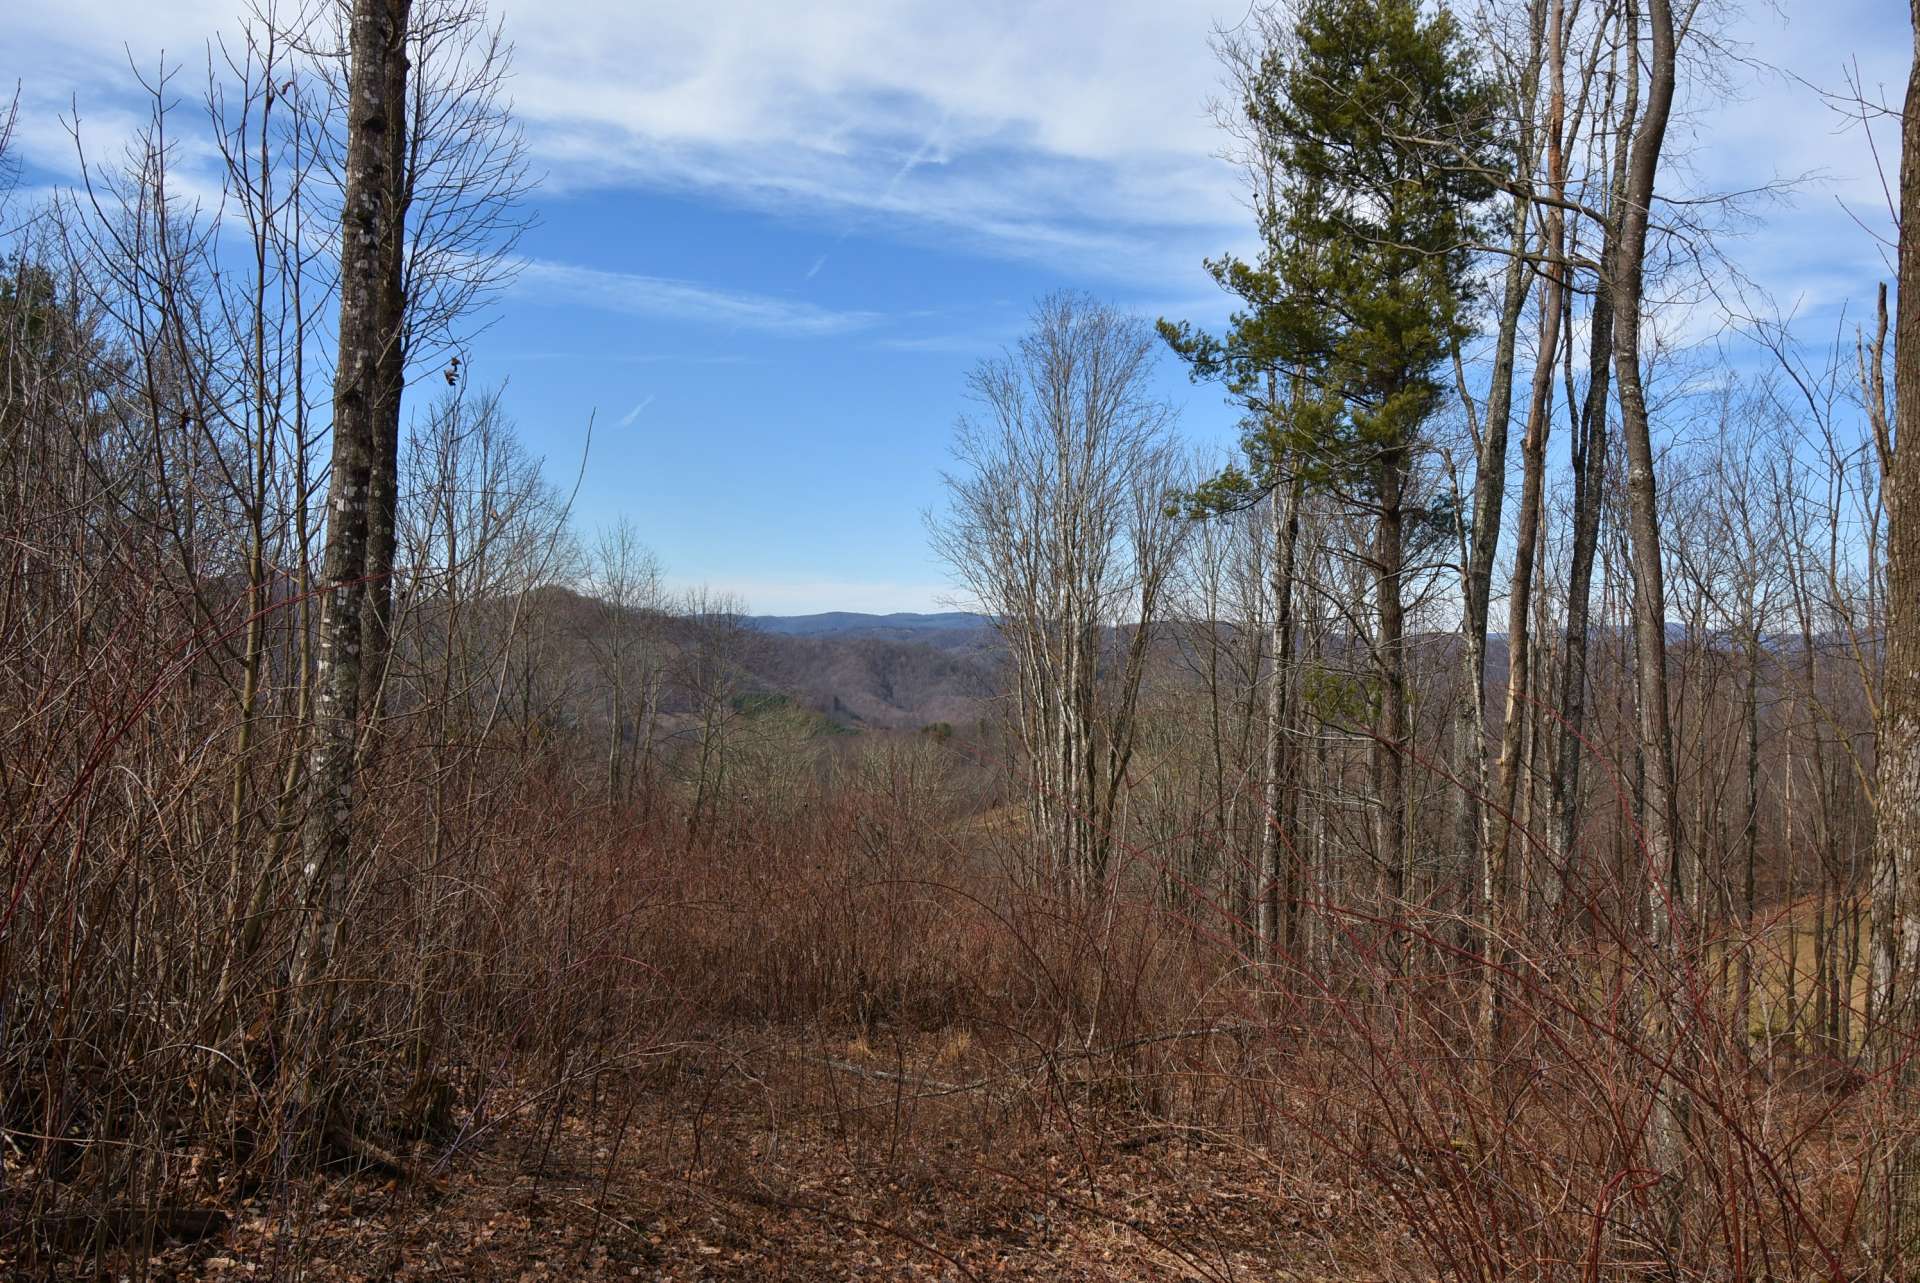 Imagine your dream NC Mountain cabin or home constructed here on this site.